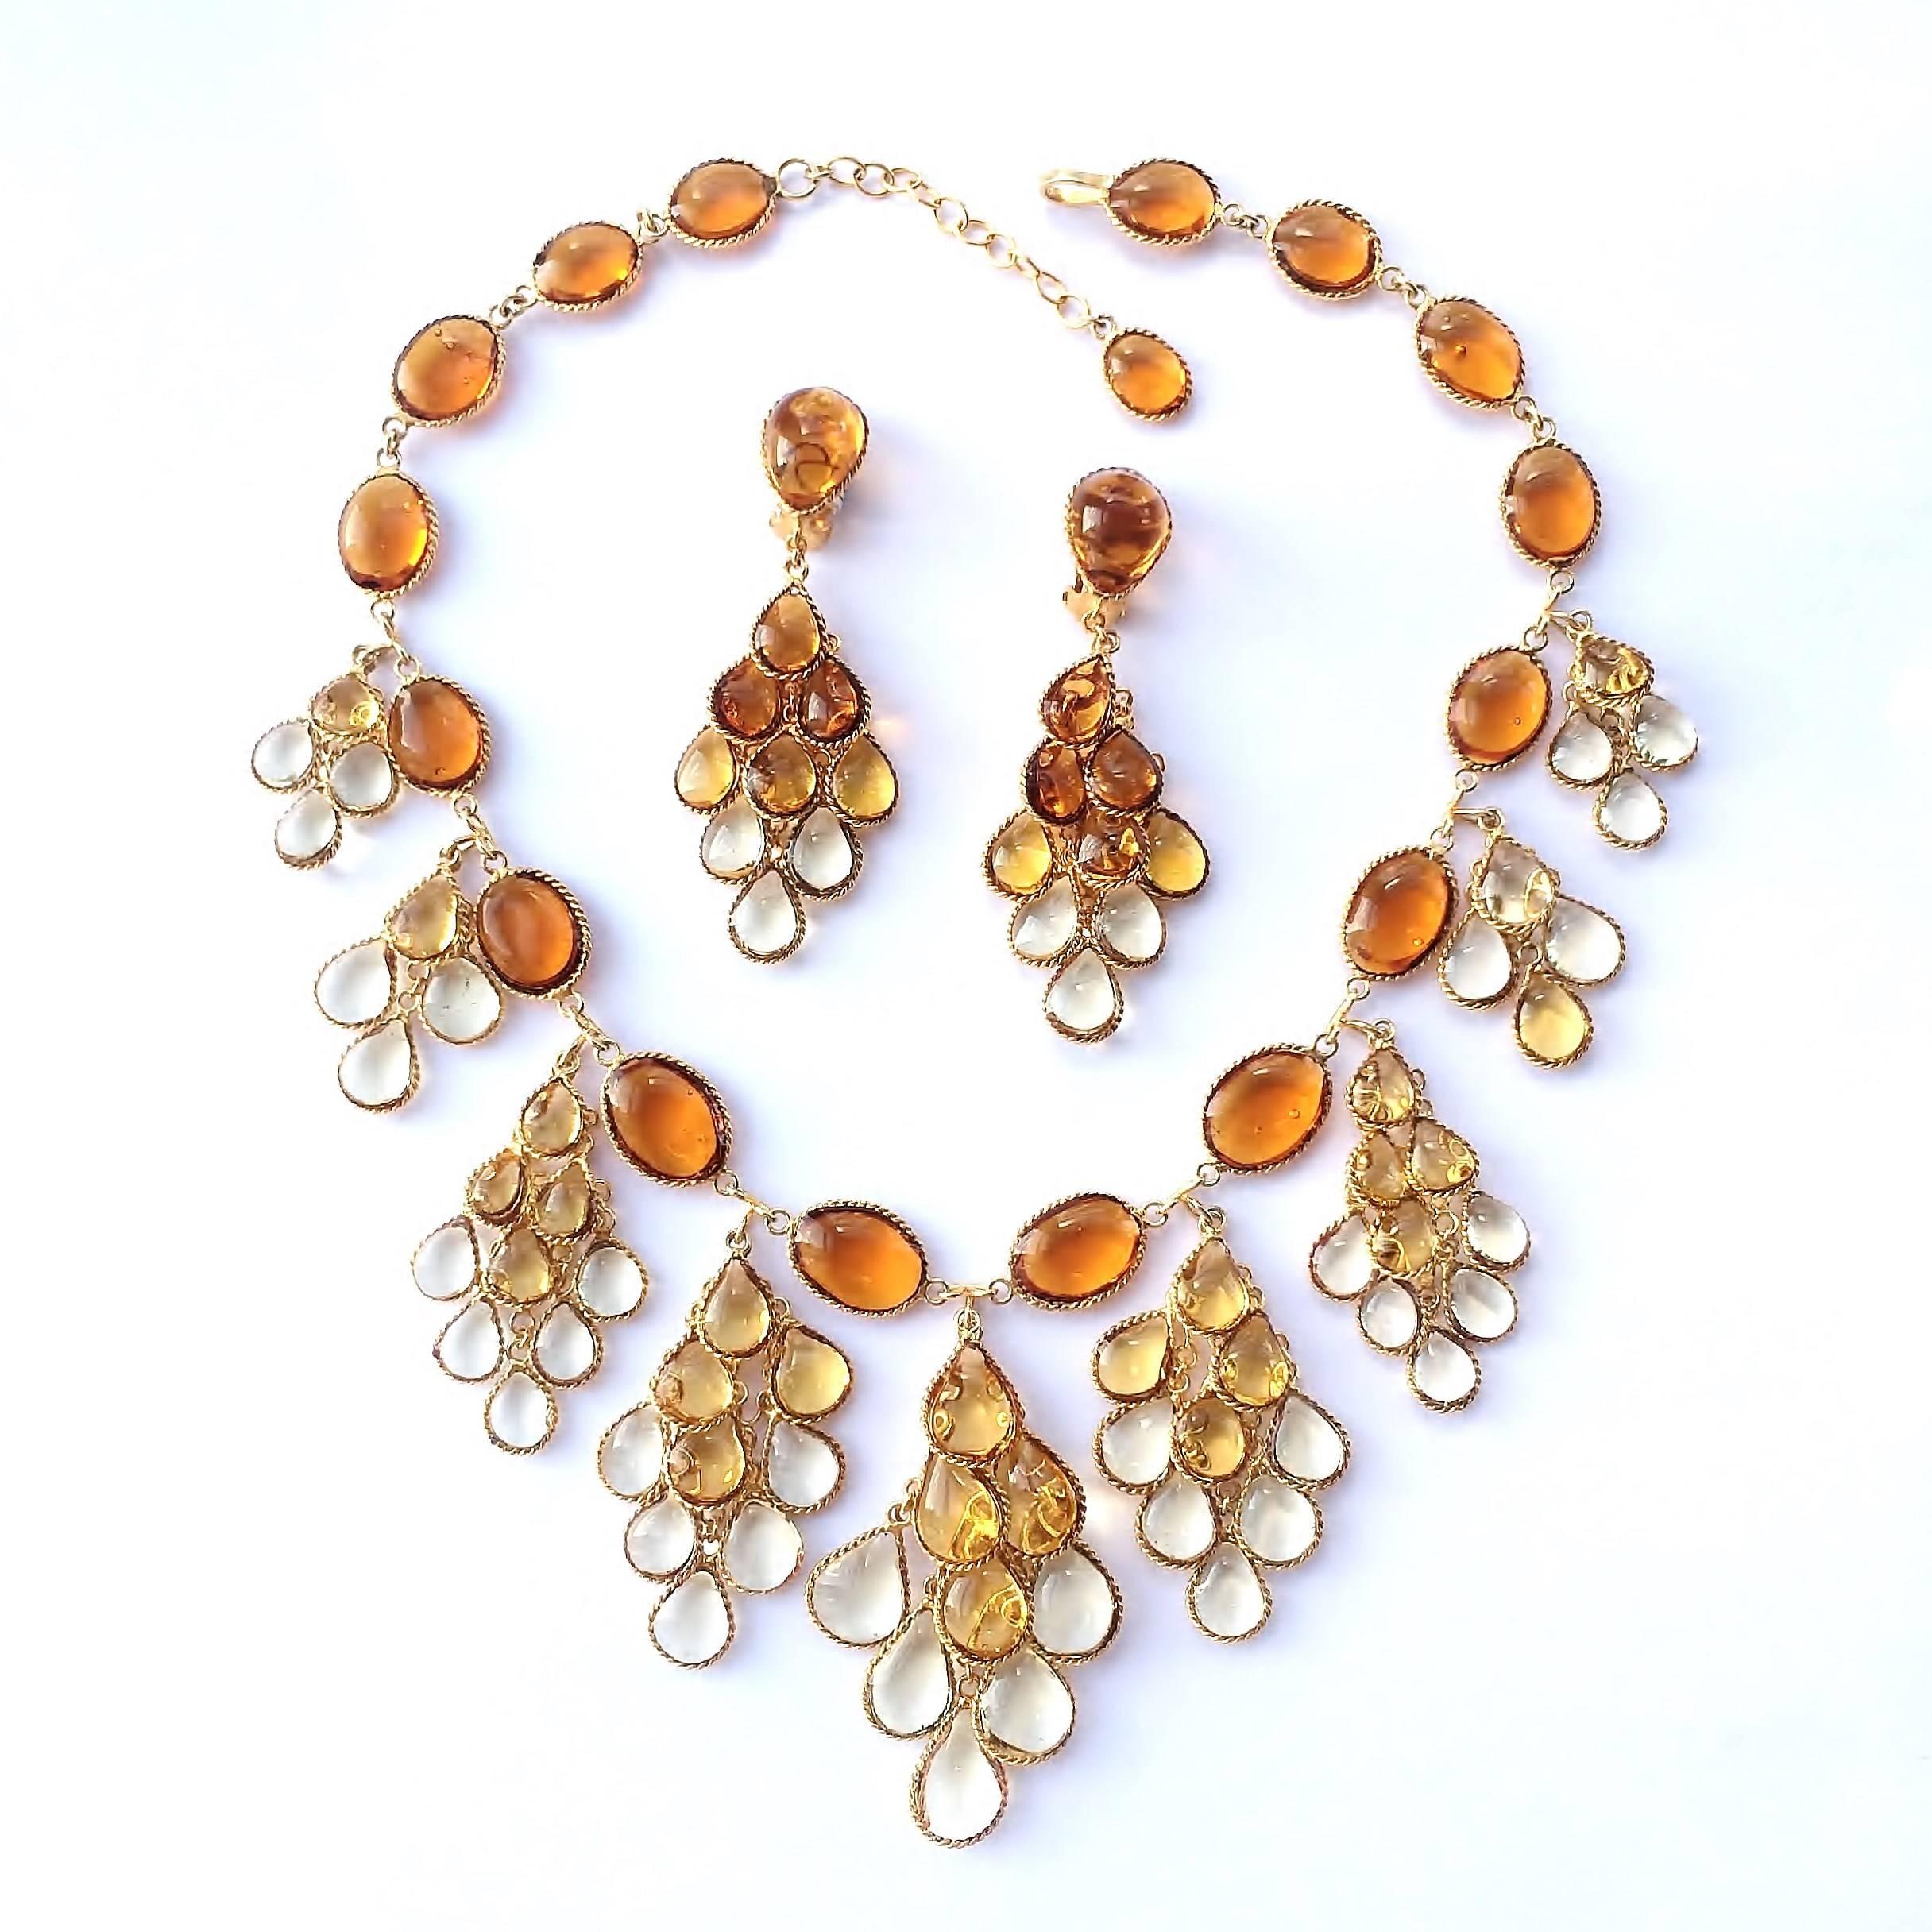  Graduated topaz to citrine poured glass and gilt articulated drop earrings For Sale 4